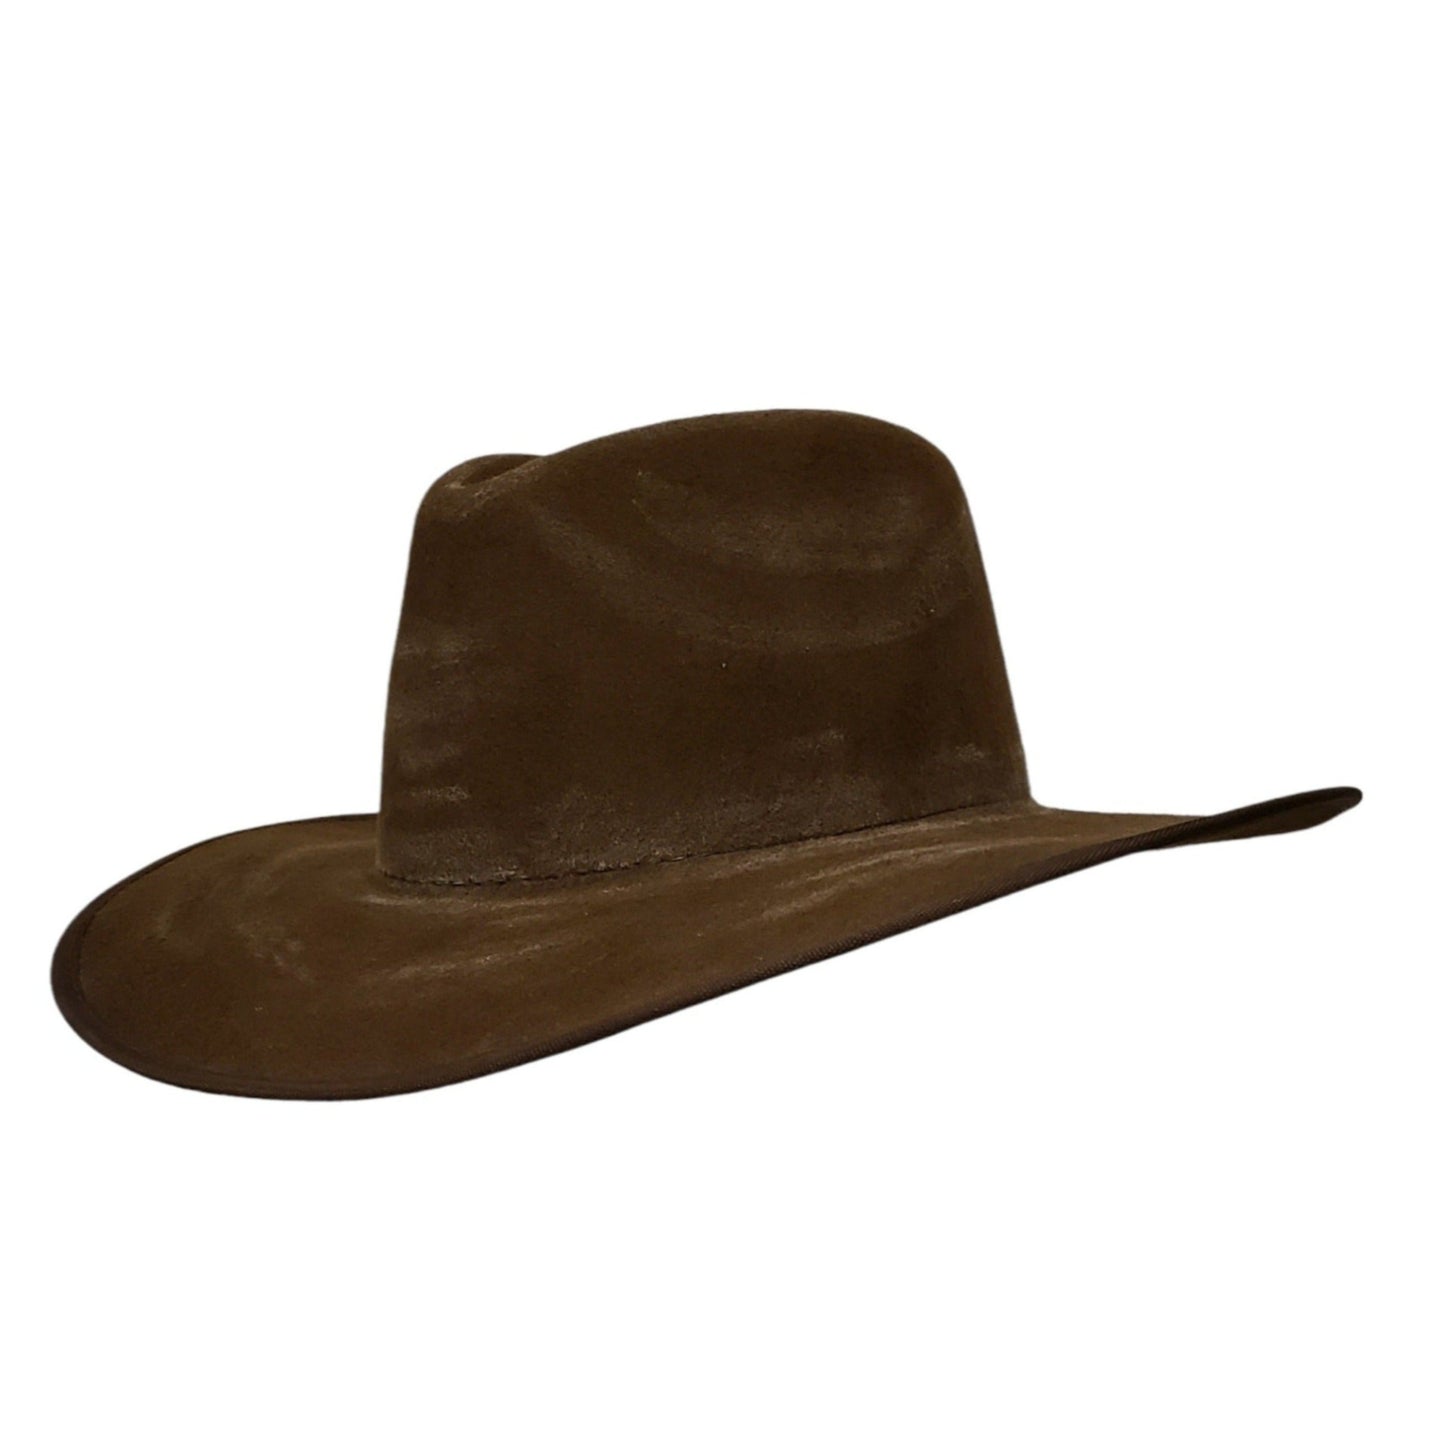 Cashmere wool cowboy hat at western hats near me